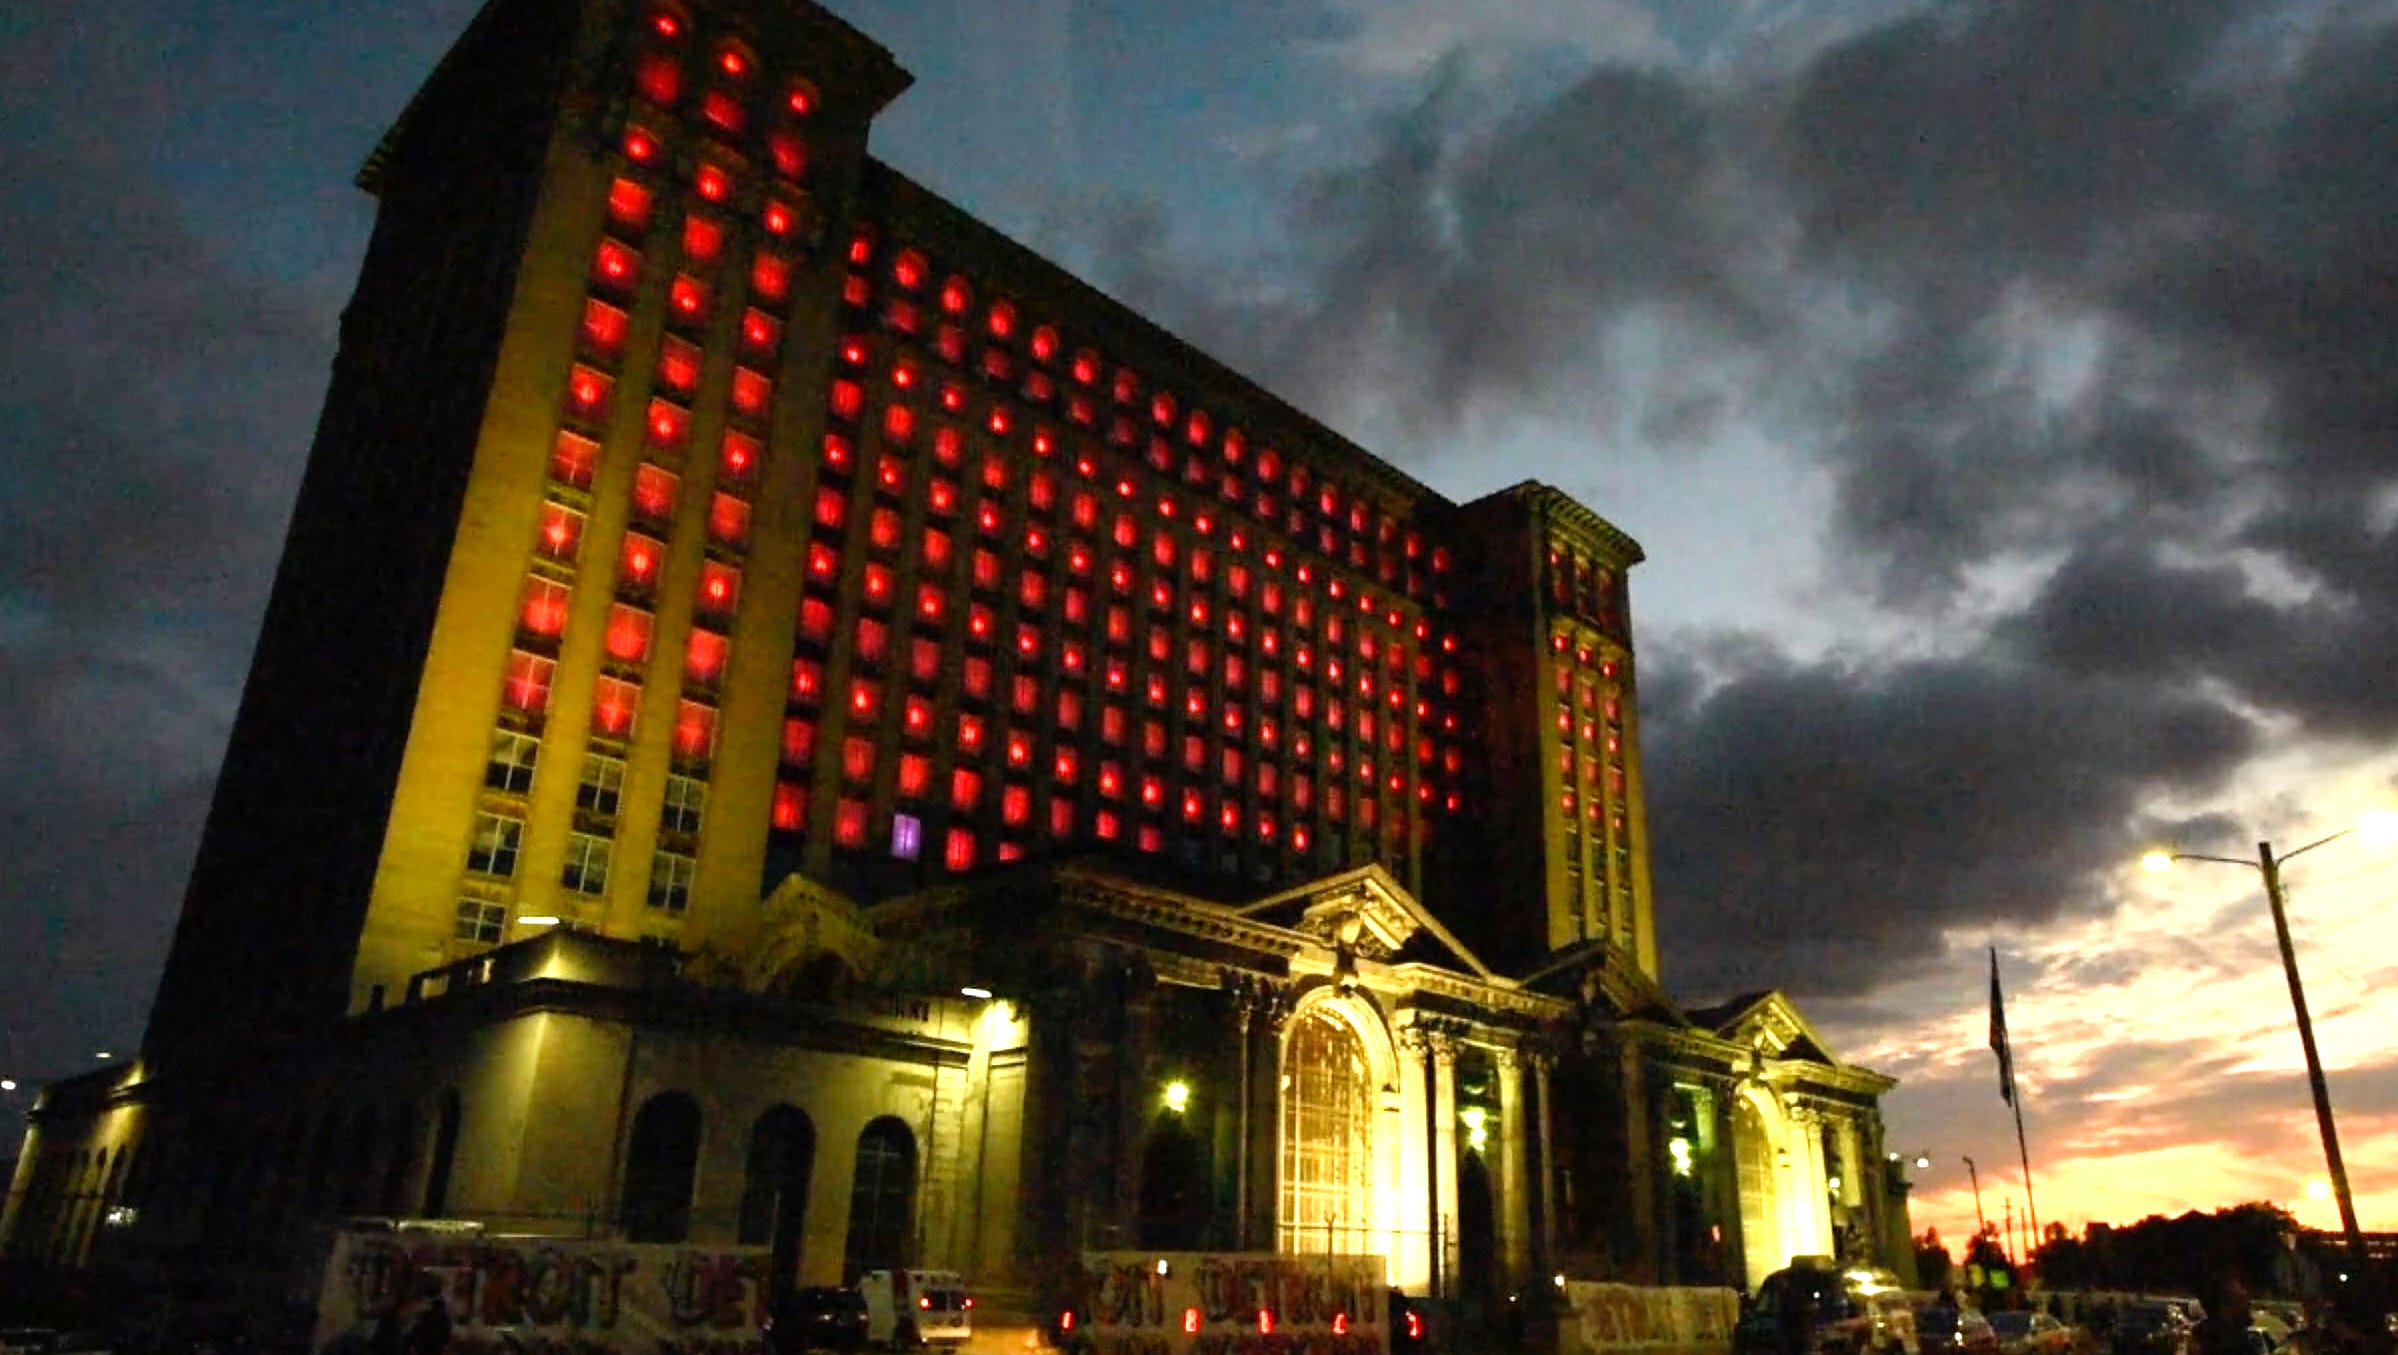 A highlight of the Detroit Homecoming event was a light show of changing colors from the windows.